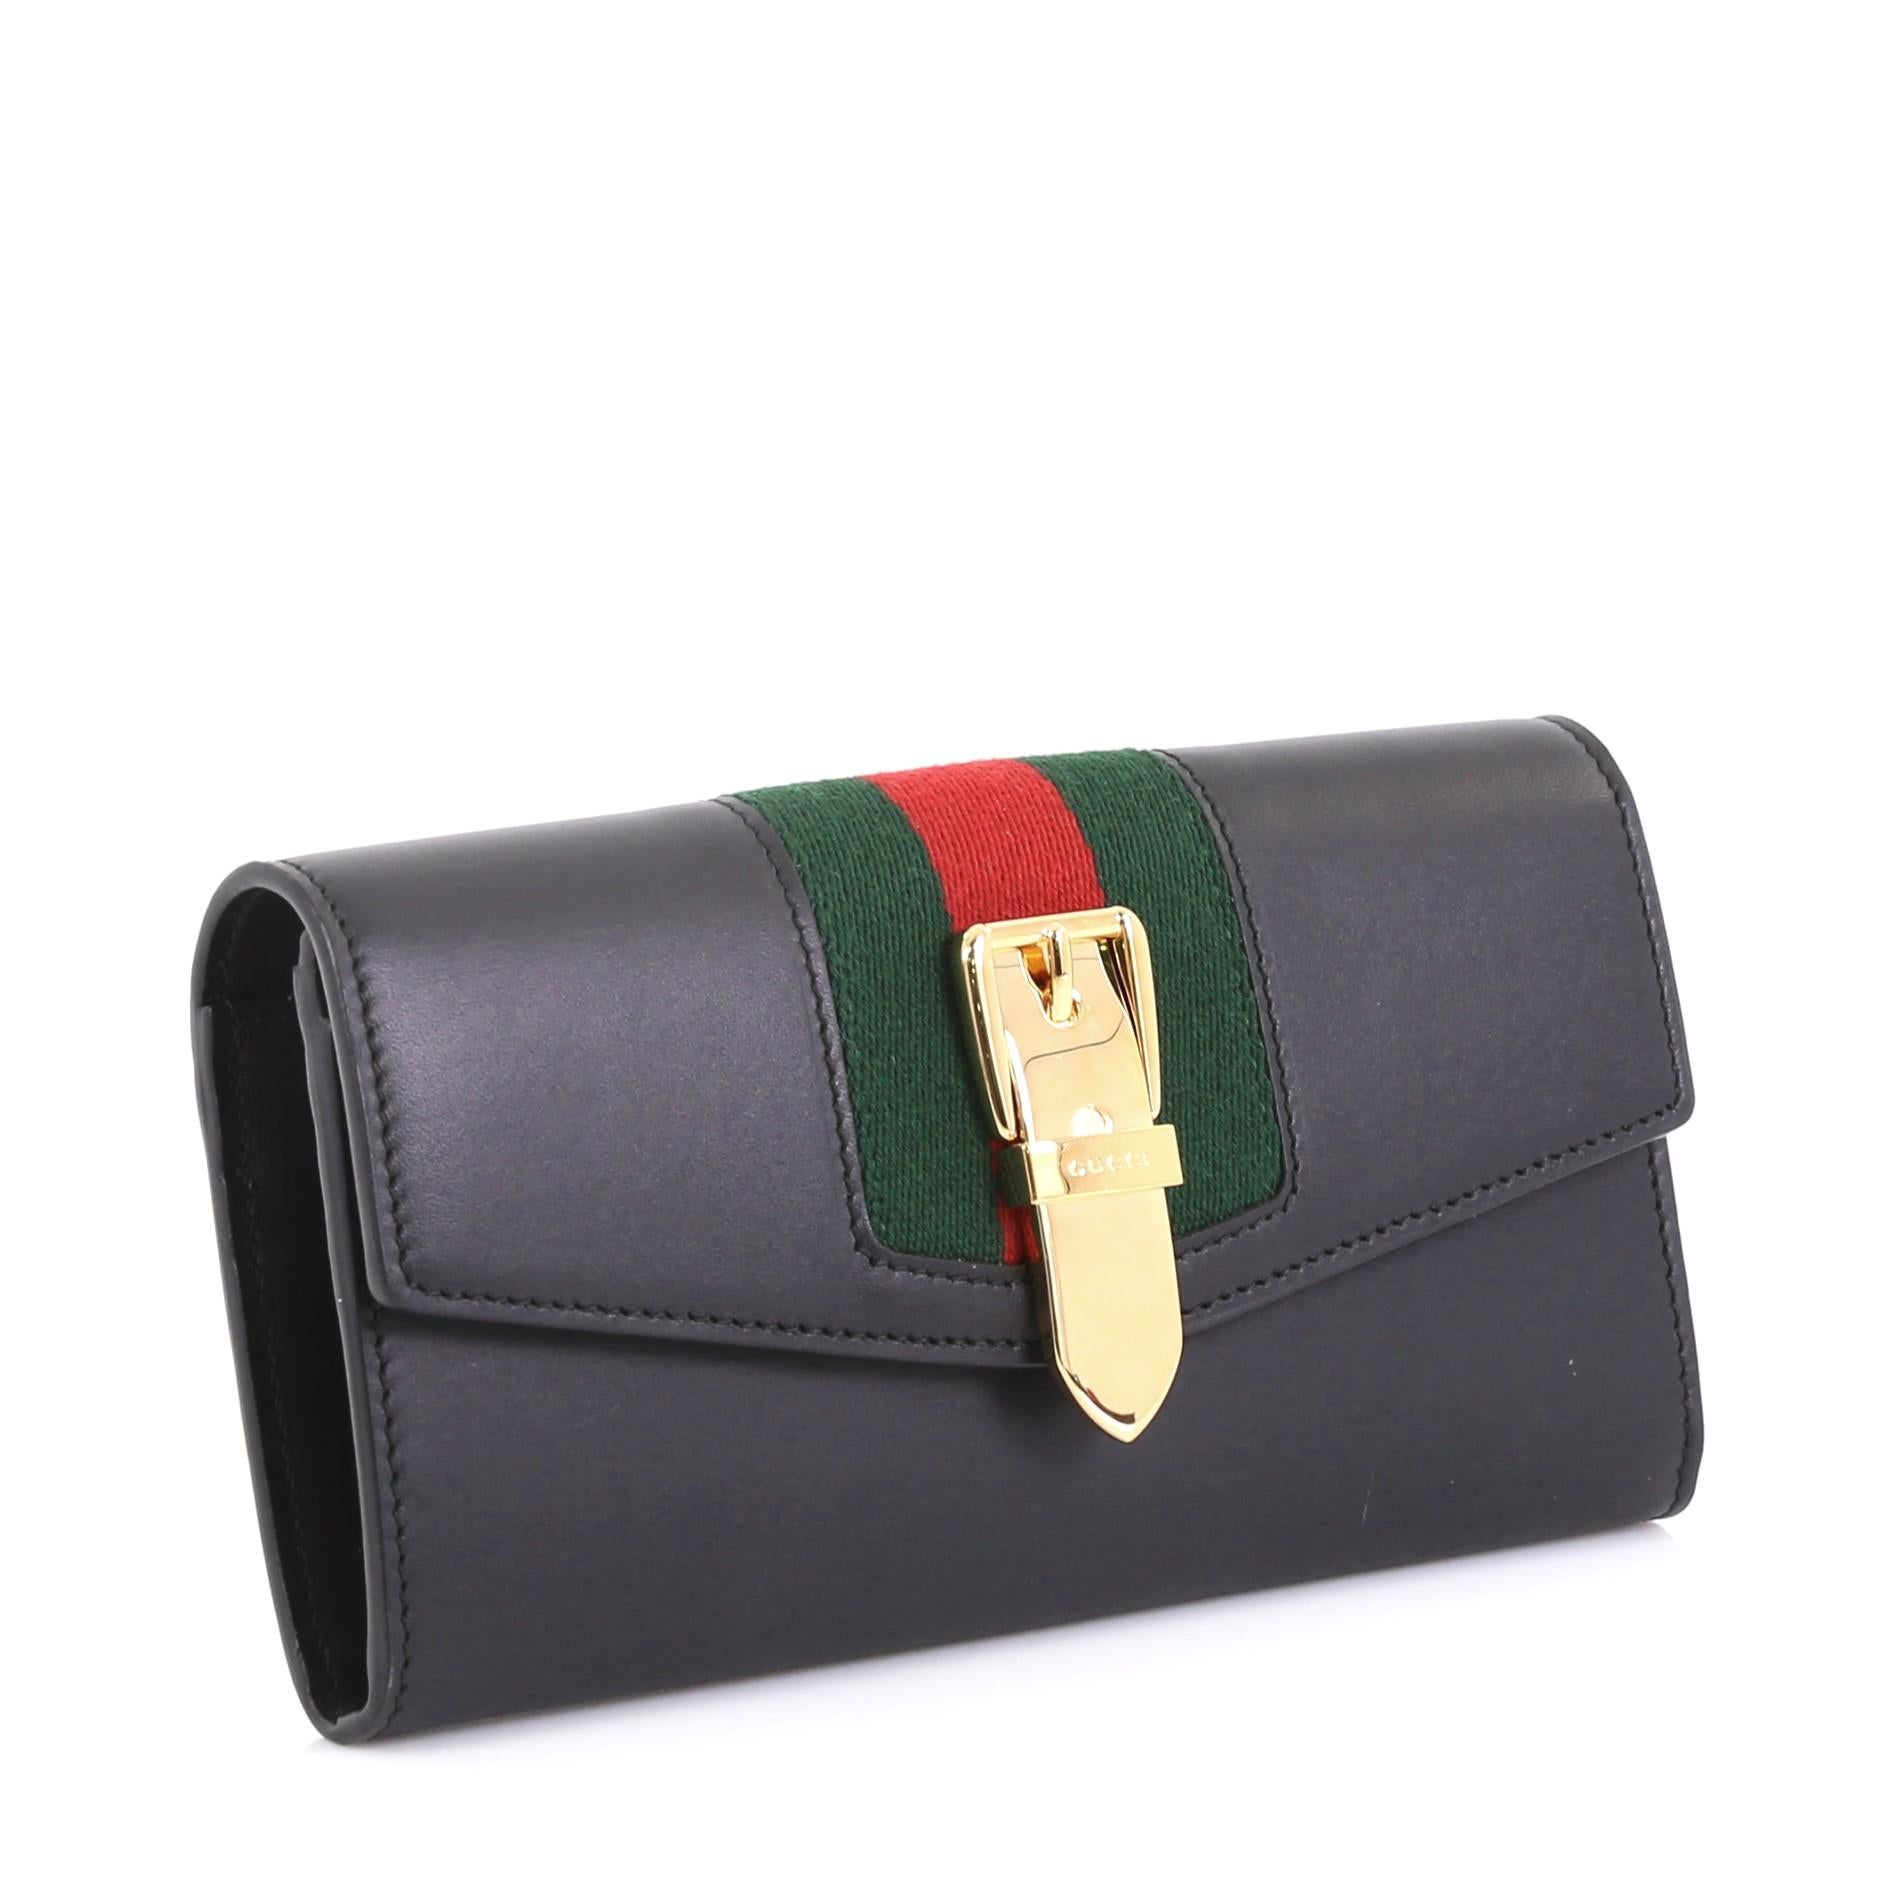 This Gucci Sylvie Continental Wallet Leather, crafted from black leather, features a nylon web detail with buckle and gold-tone hardware. It opens to a black leather interior with multiple card slots and center zip compartment. 

Estimated Retail